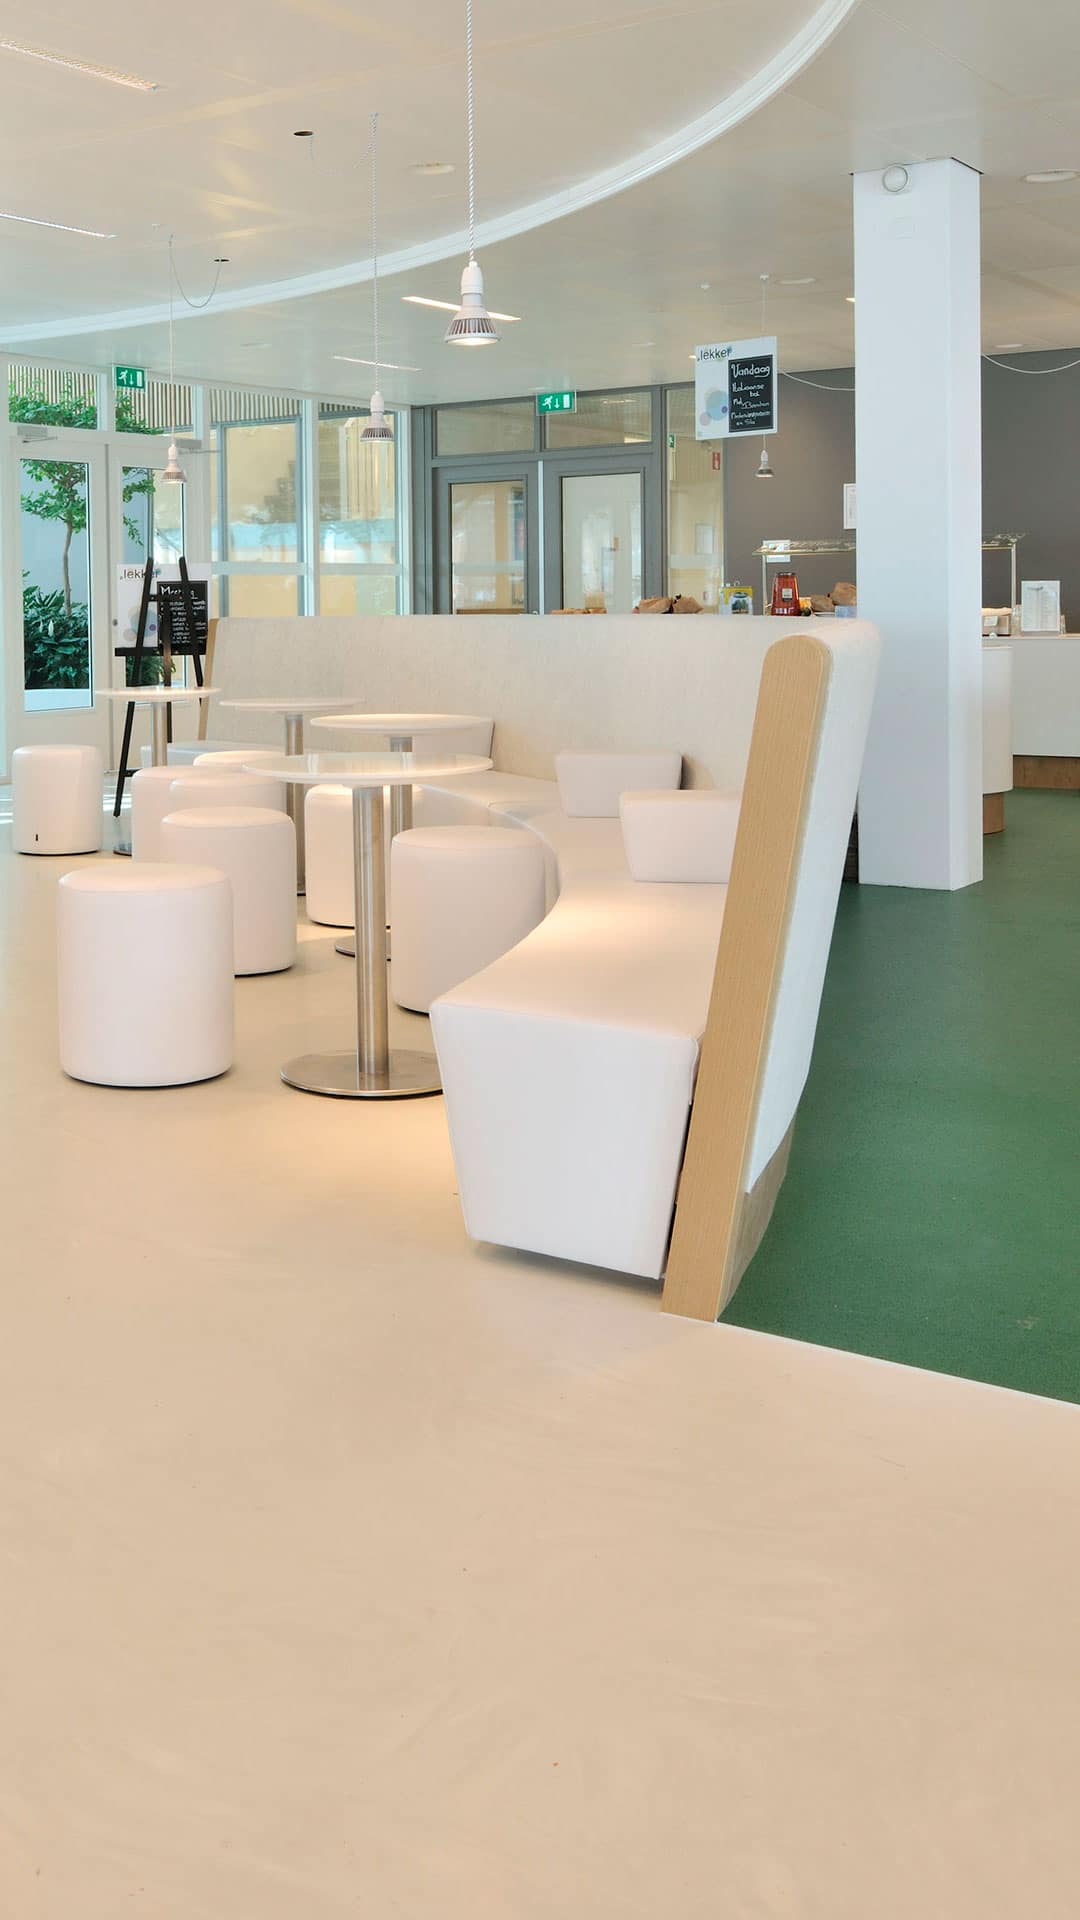 Stratum Resin Flooring - Bolidtop FiftyFifty resin floor - Commercial building